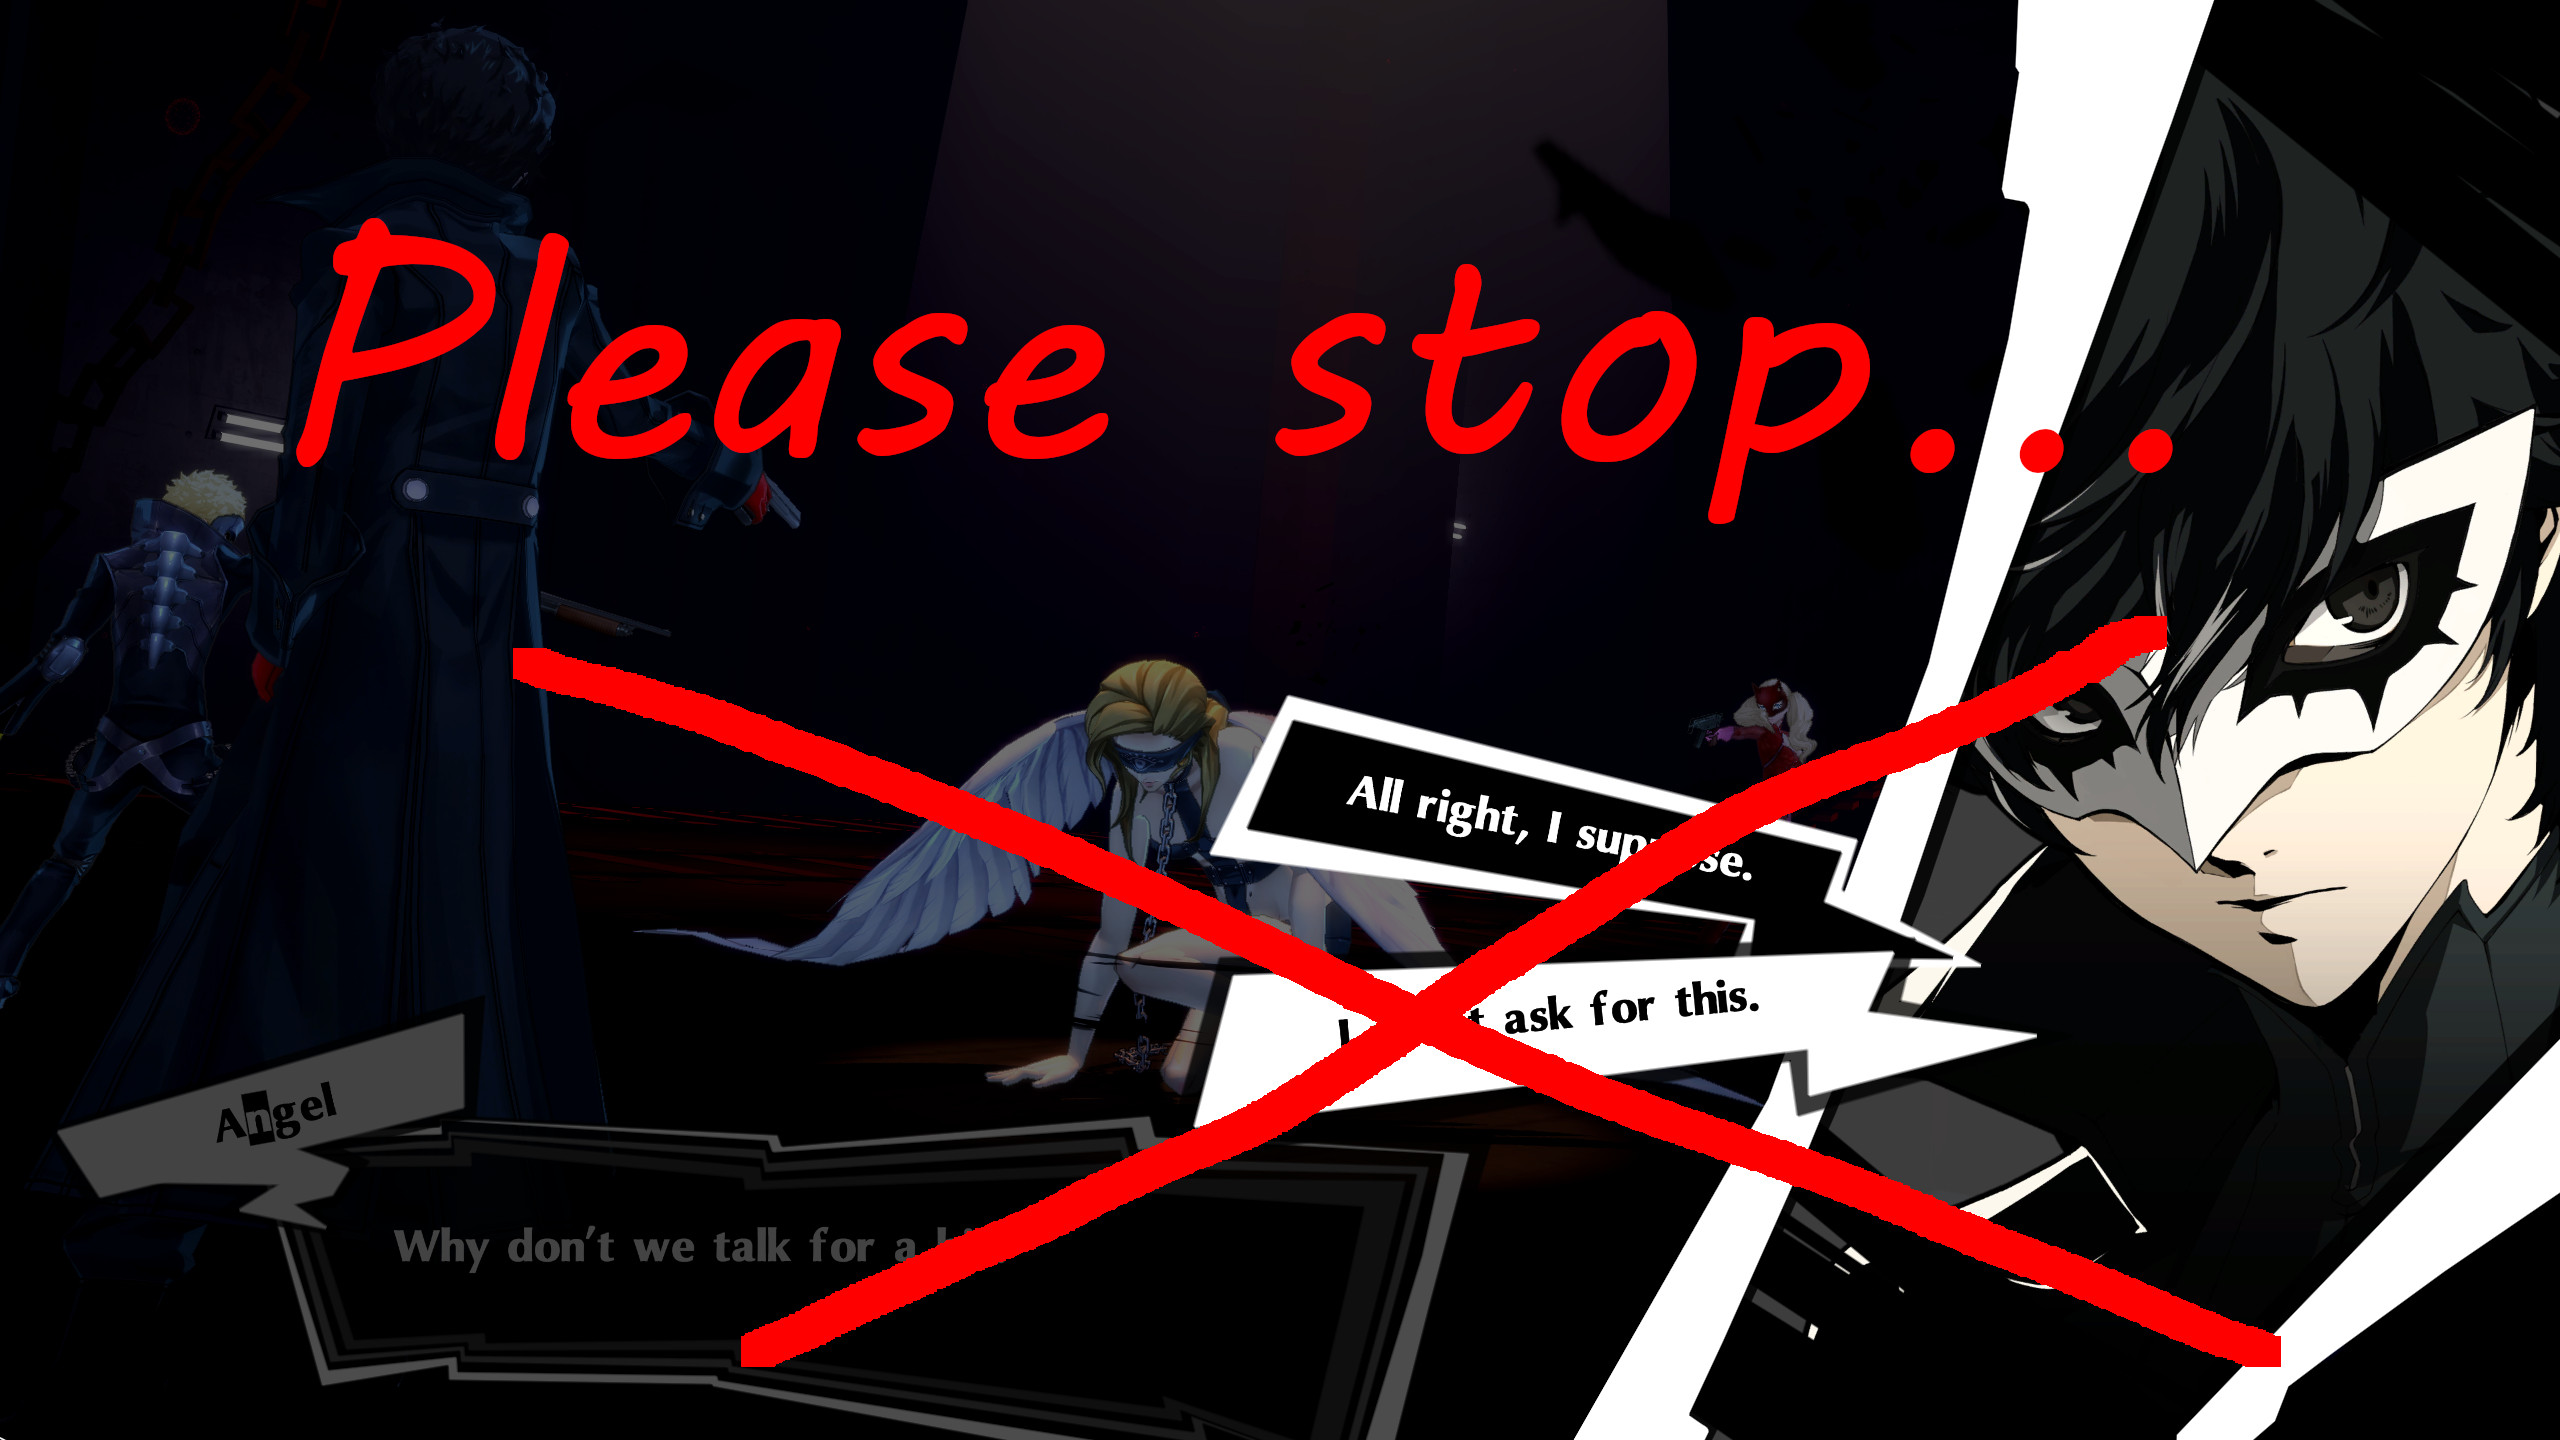 I didn't ask for this [Persona 5 Royal (PC)] [Mods]